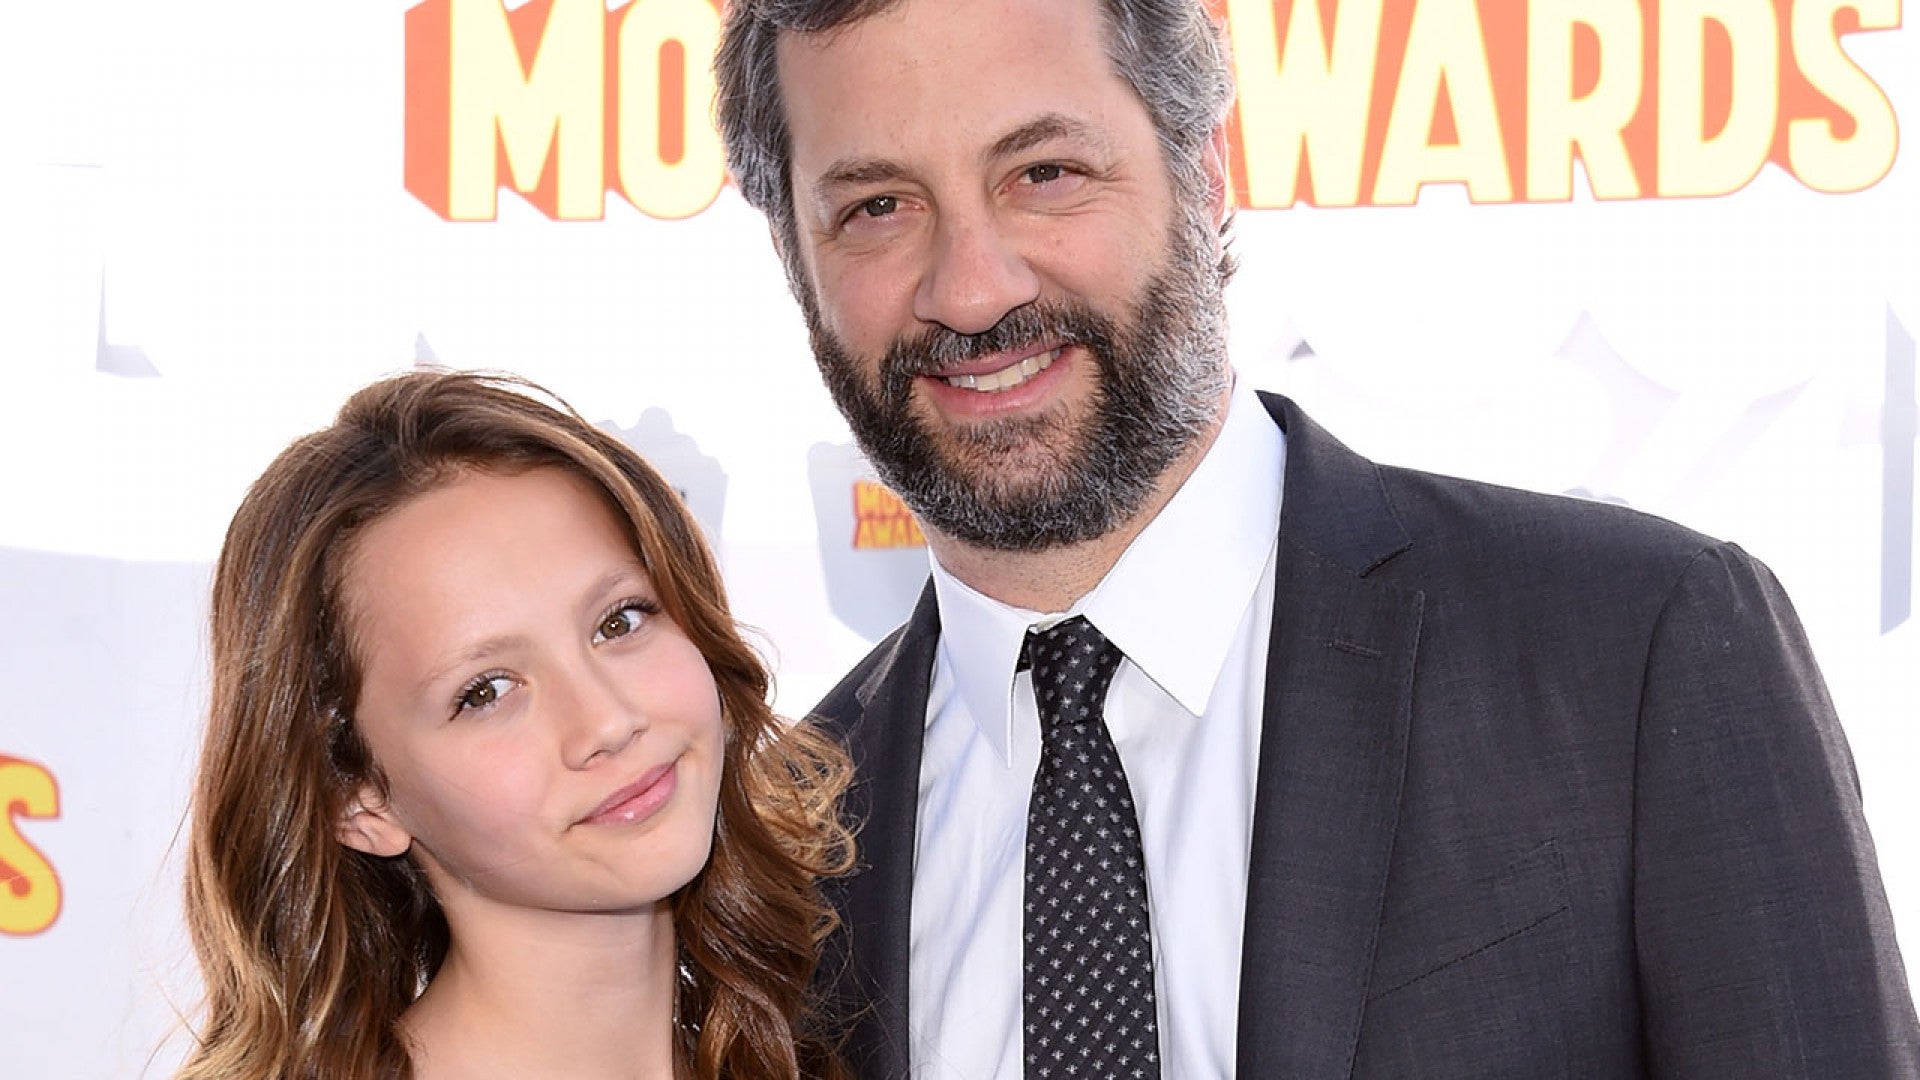 Judd Apatow's Daughter Apologizes to Bouncers She's 'Lied' to